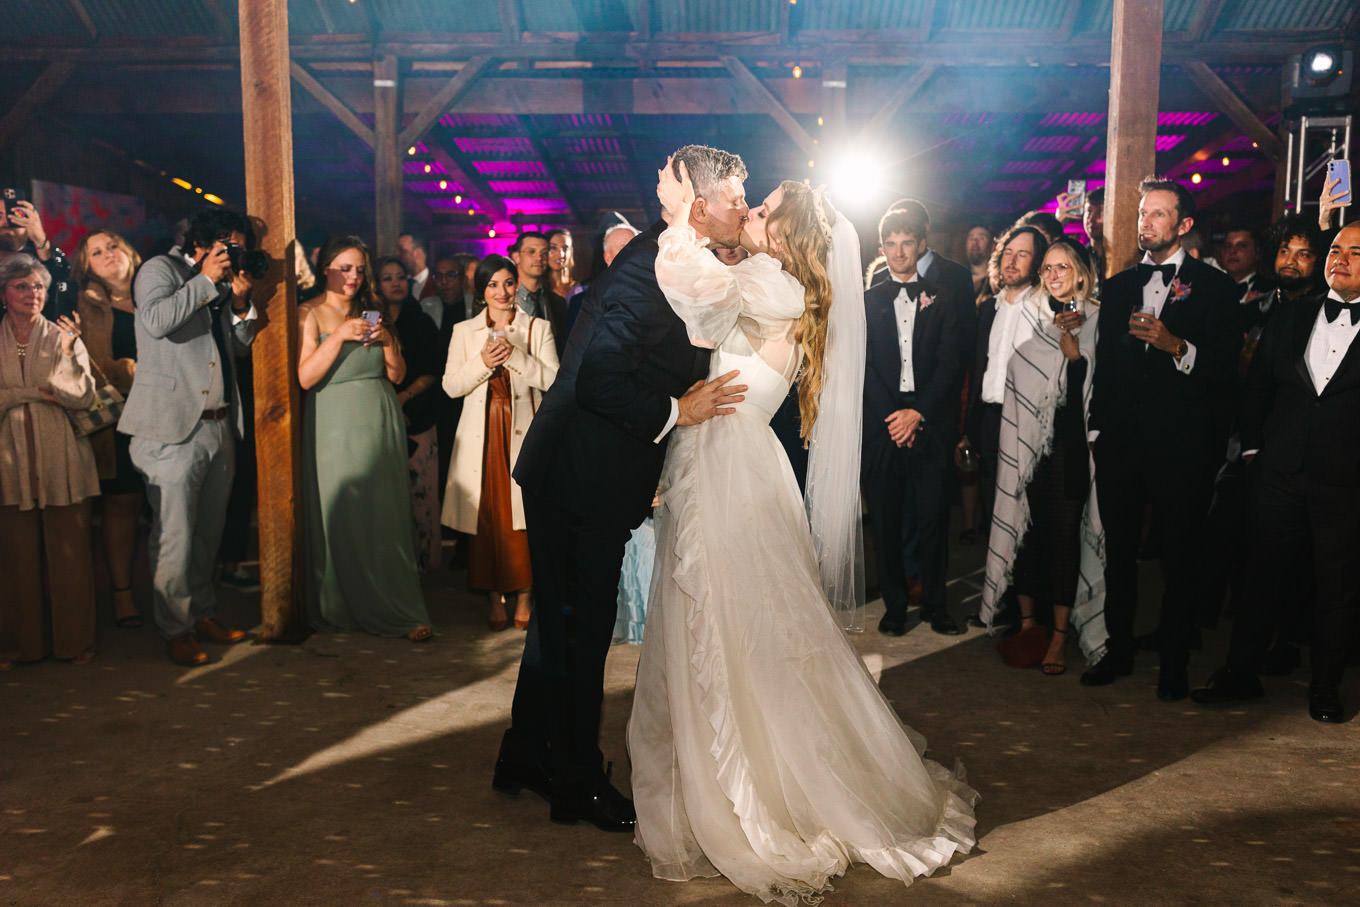 Bride and groom first dance at wedding | Colorful and quirky wedding at Higuera Ranch in San Luis Obispo | #sanluisobispowedding #californiawedding #higueraranch #madonnainn   Source: Mary Costa Photography | Los Angeles